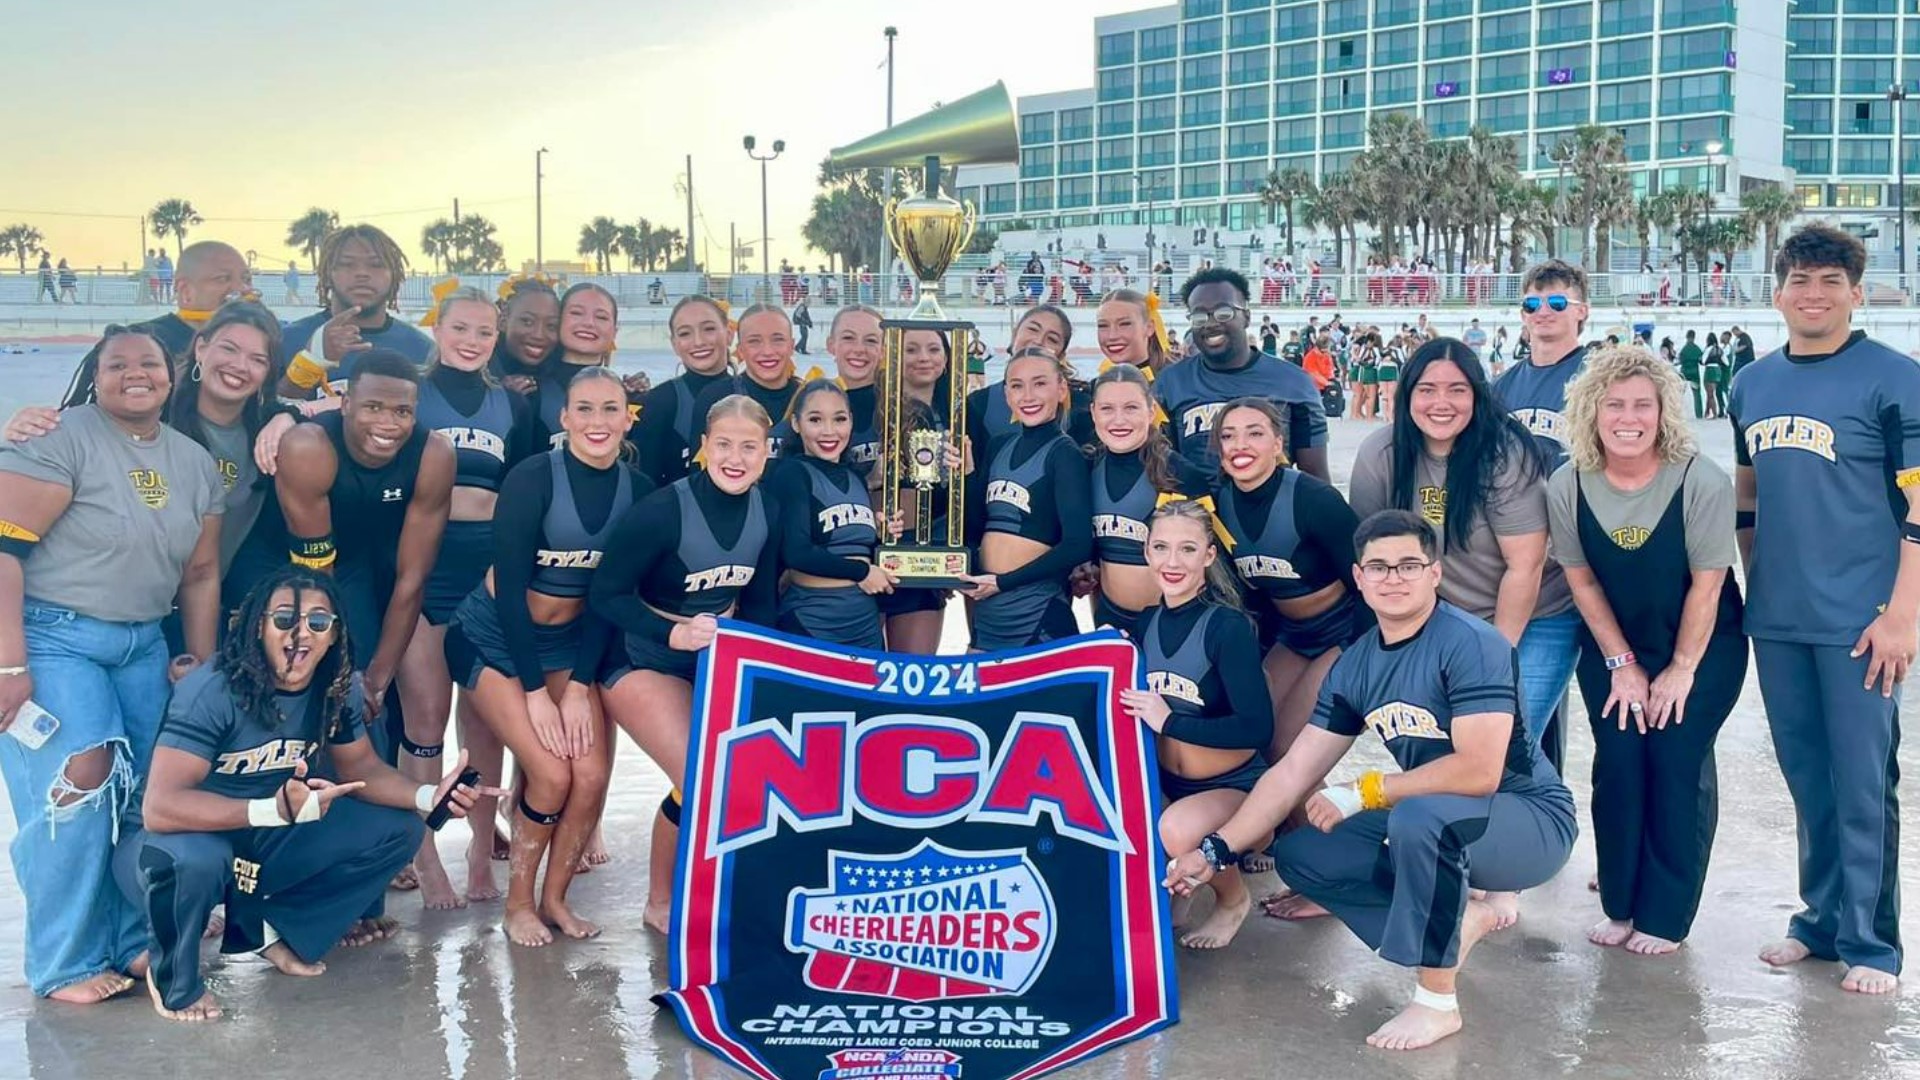 The team became the 2024 National Cheer Association Collegiate National Champions for the intermediate large co-ed division during the NCA Nationals this past weeken